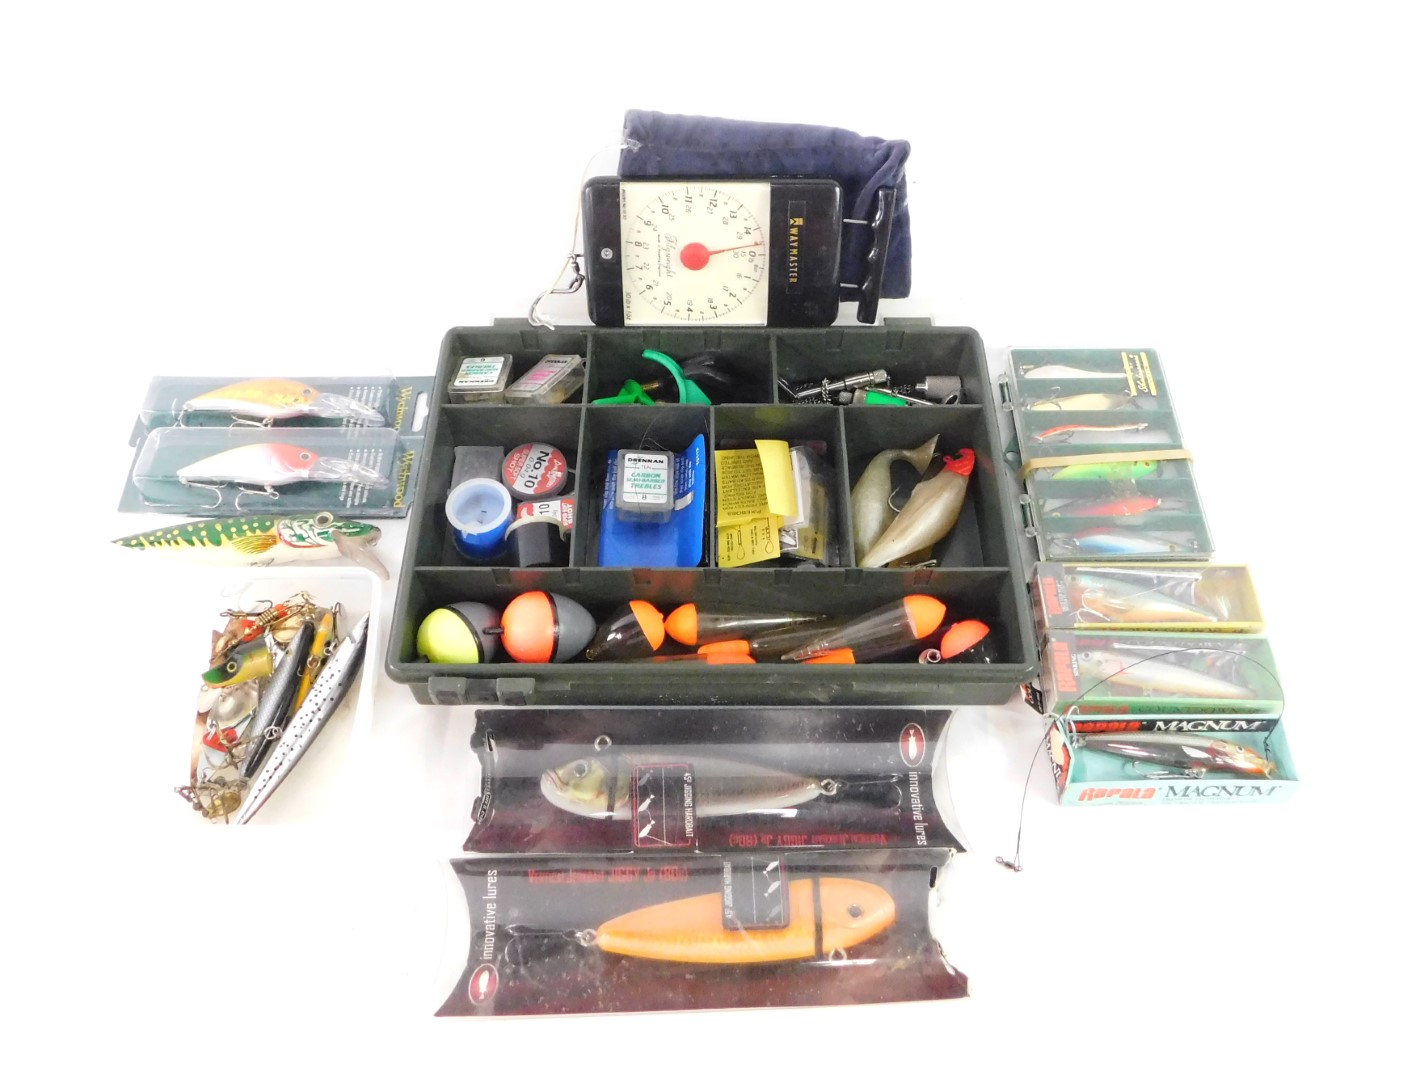 Fishing lures, barbed trebles, floats, etc. (2 boxes)